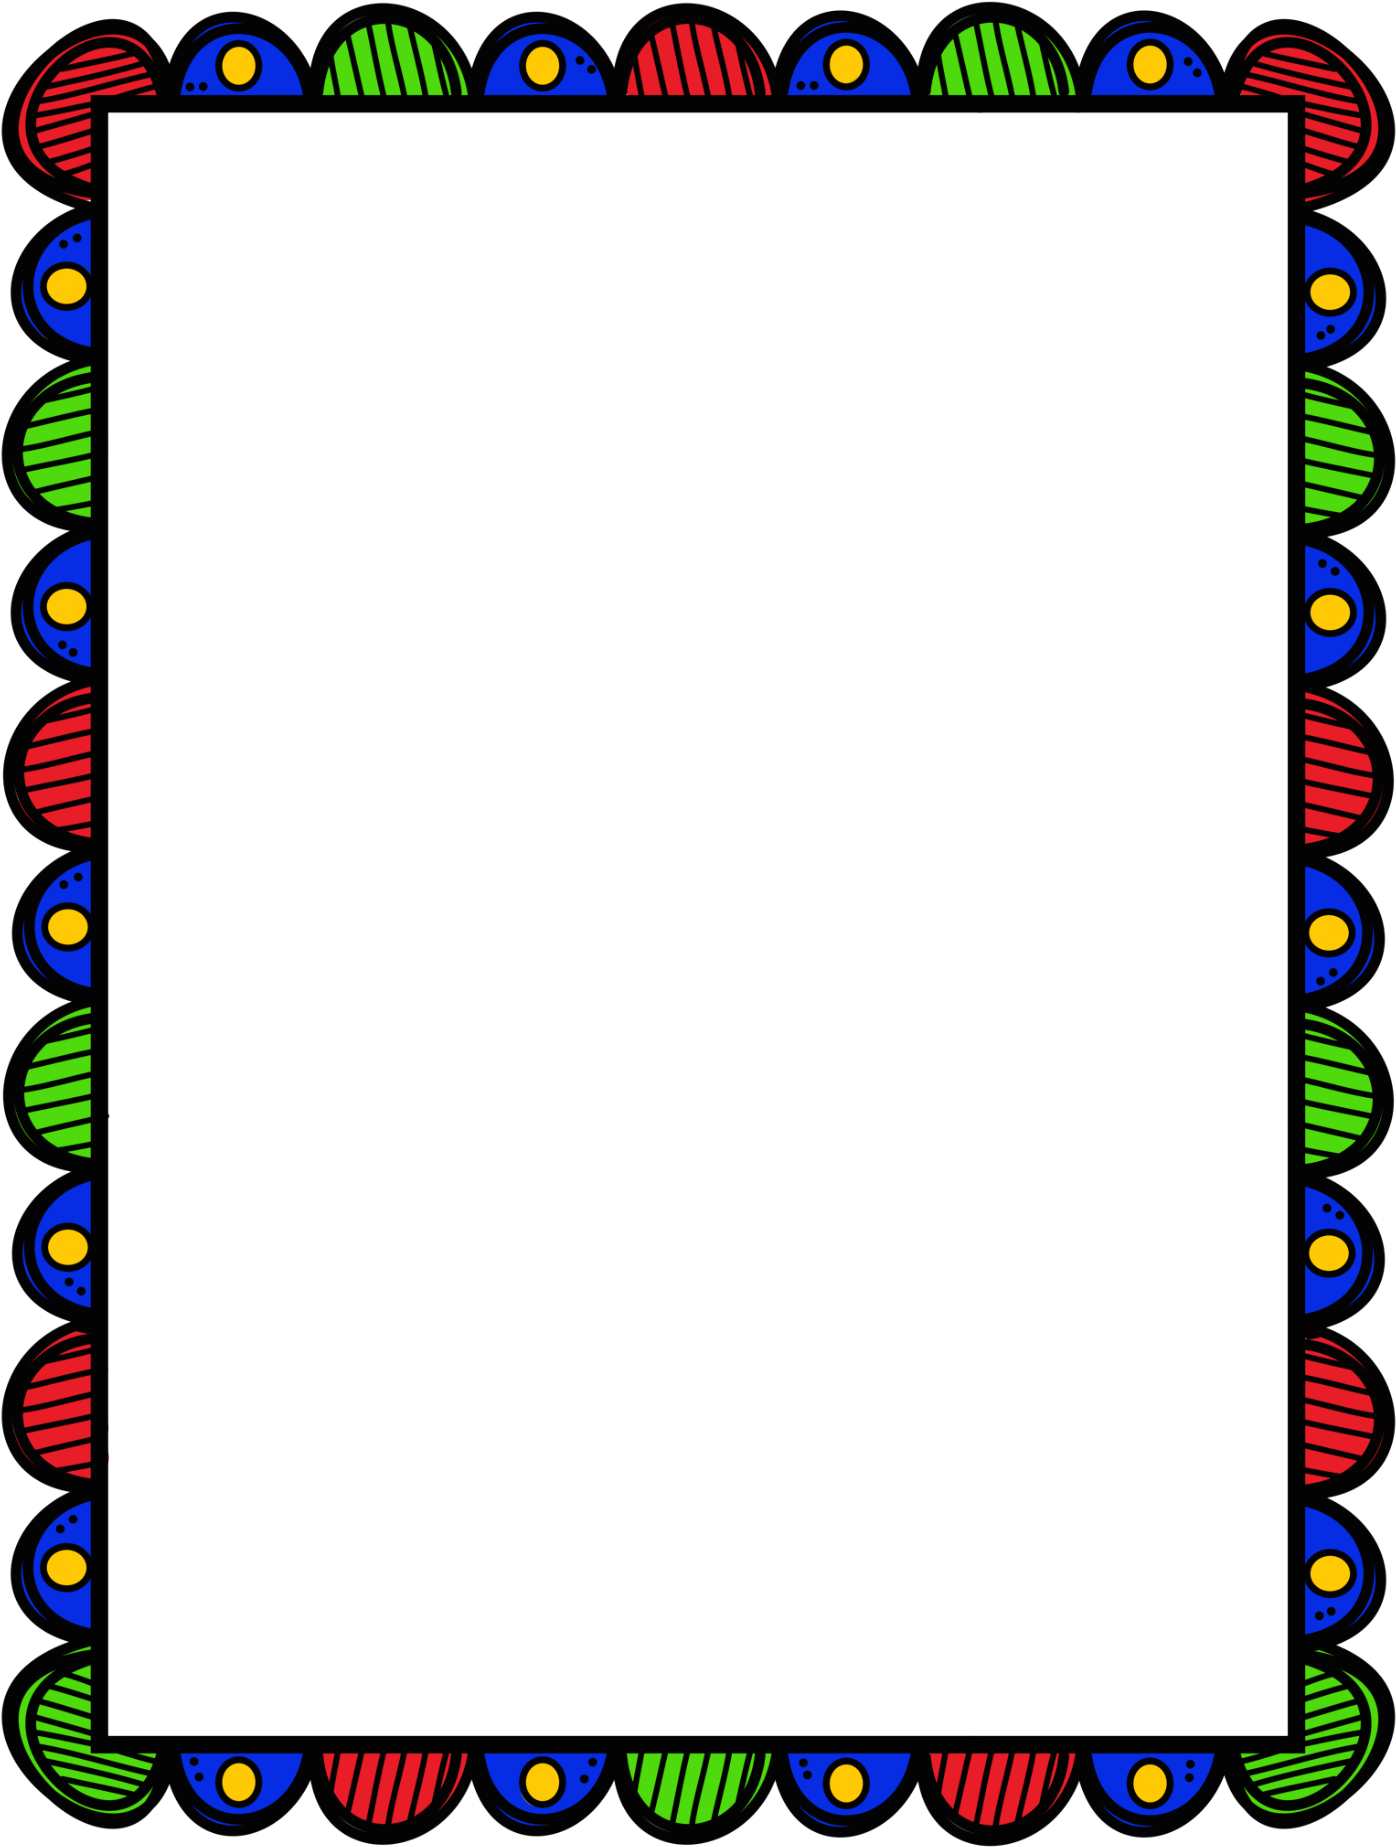 Colorful Peacock Feather Border Design